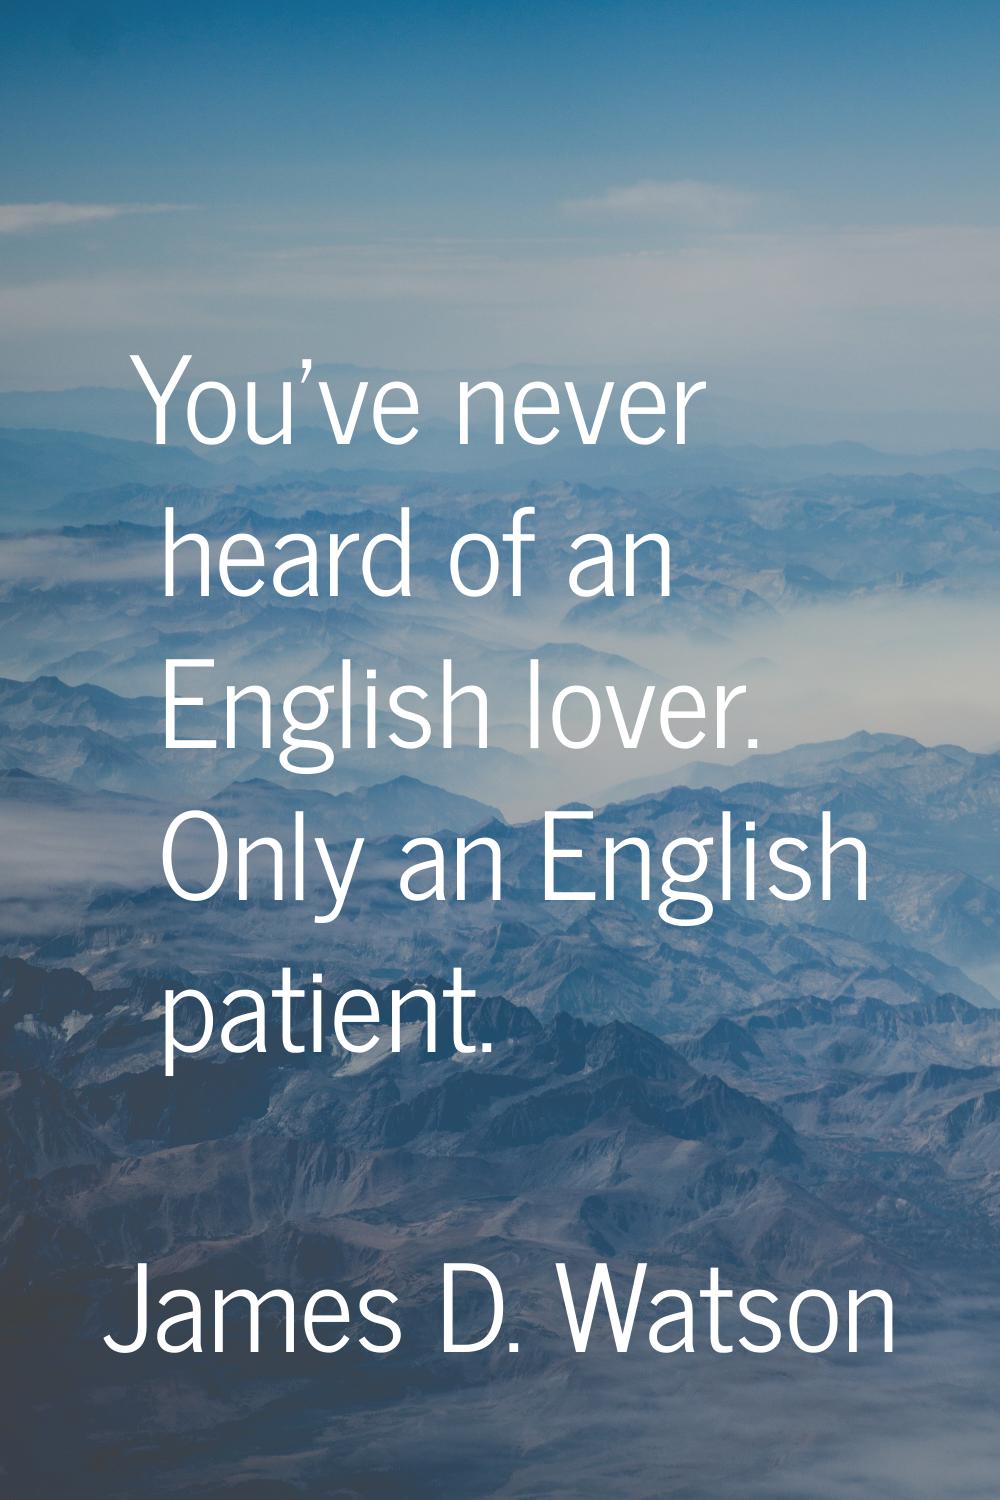 You've never heard of an English lover. Only an English patient.